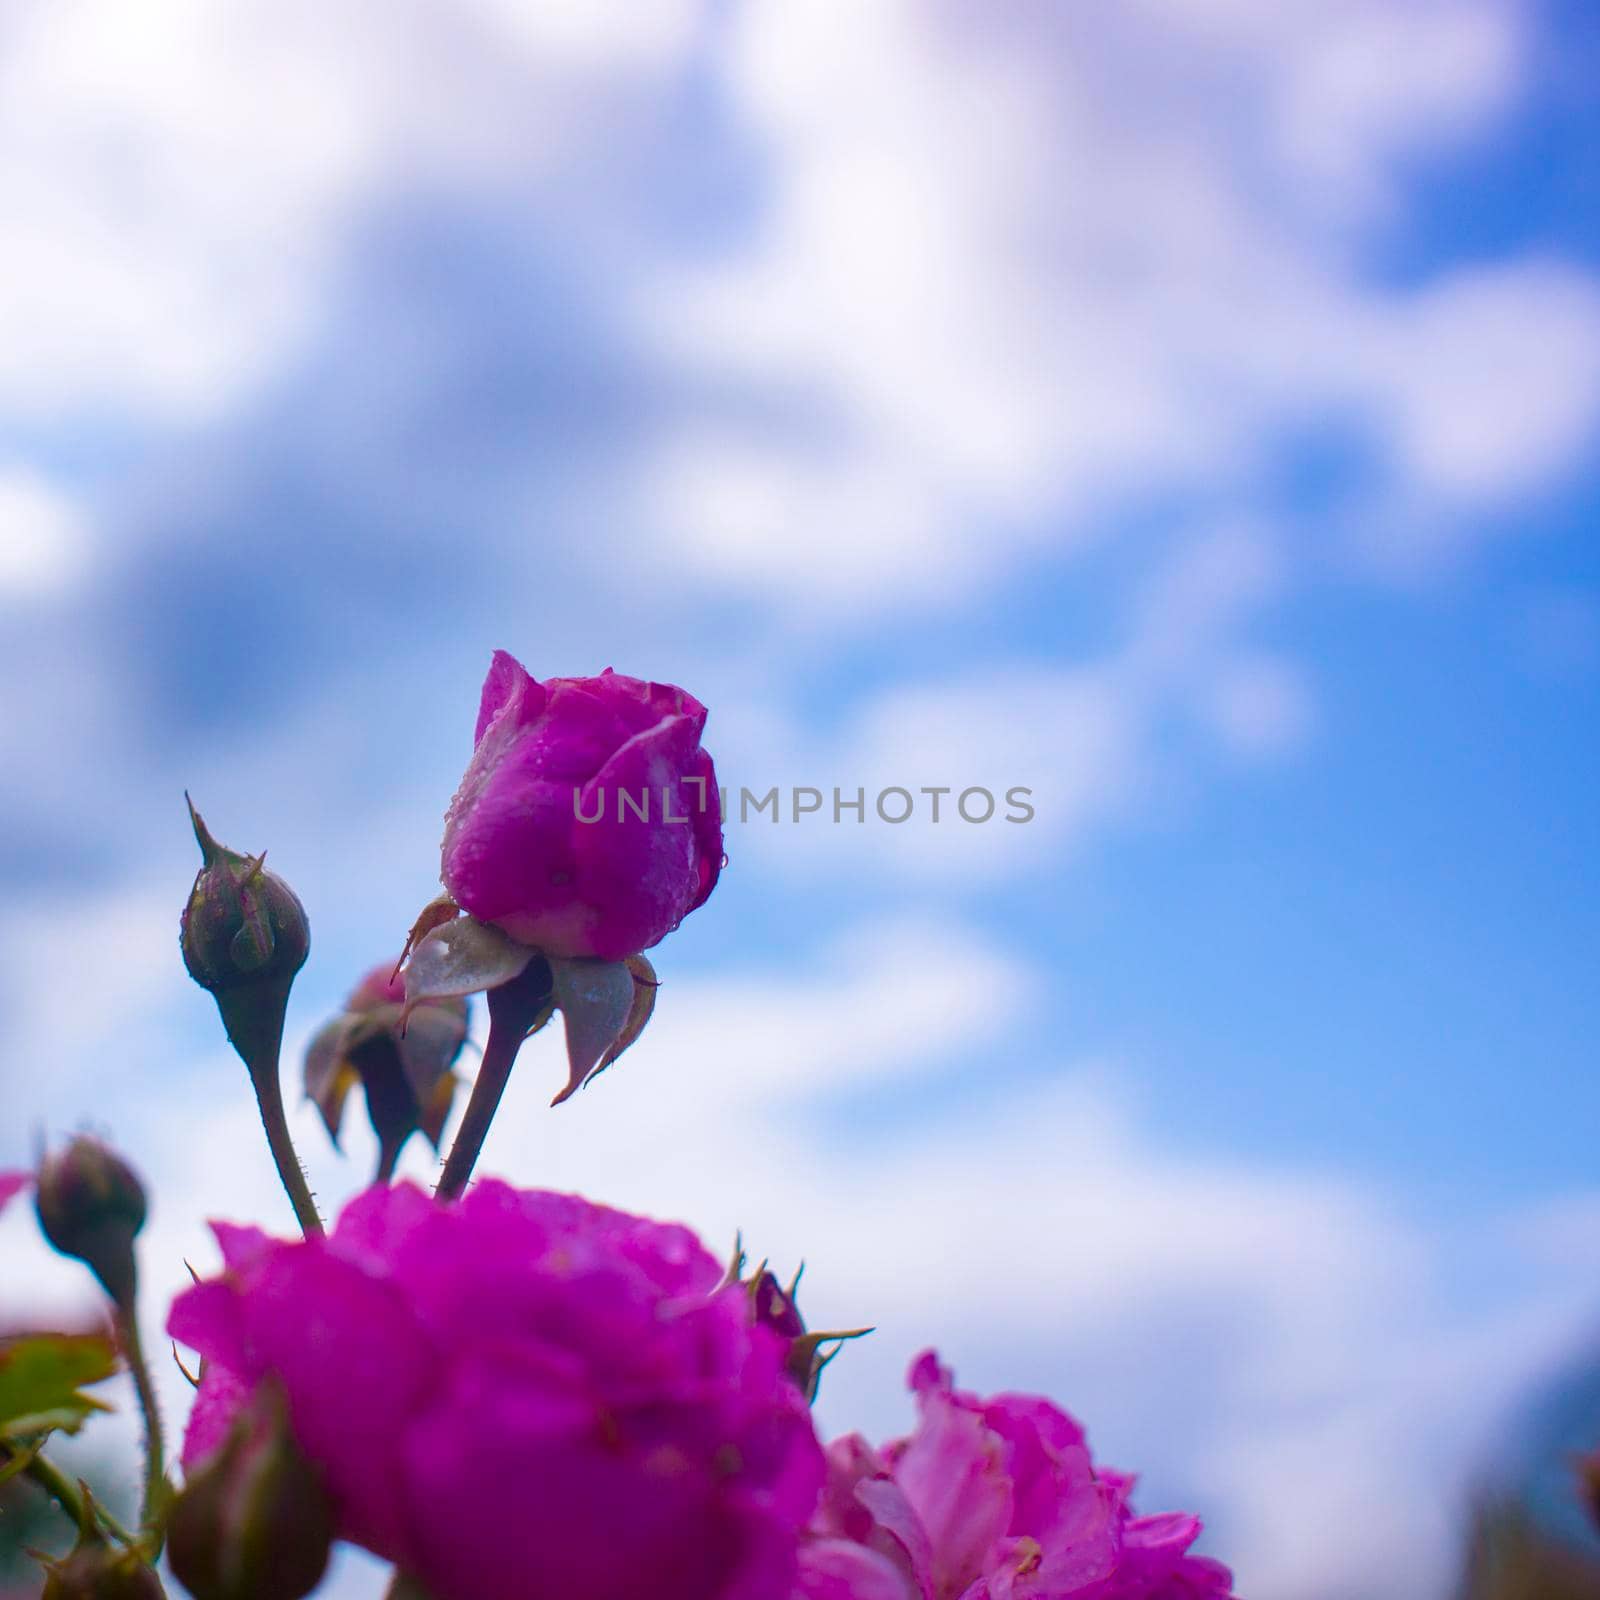 Beautiful pink roses flowers, glossy and green leaves on shrub branches against the blue cloudy sky and sun. Pink rose flowers against the romantic sky. High quality photo